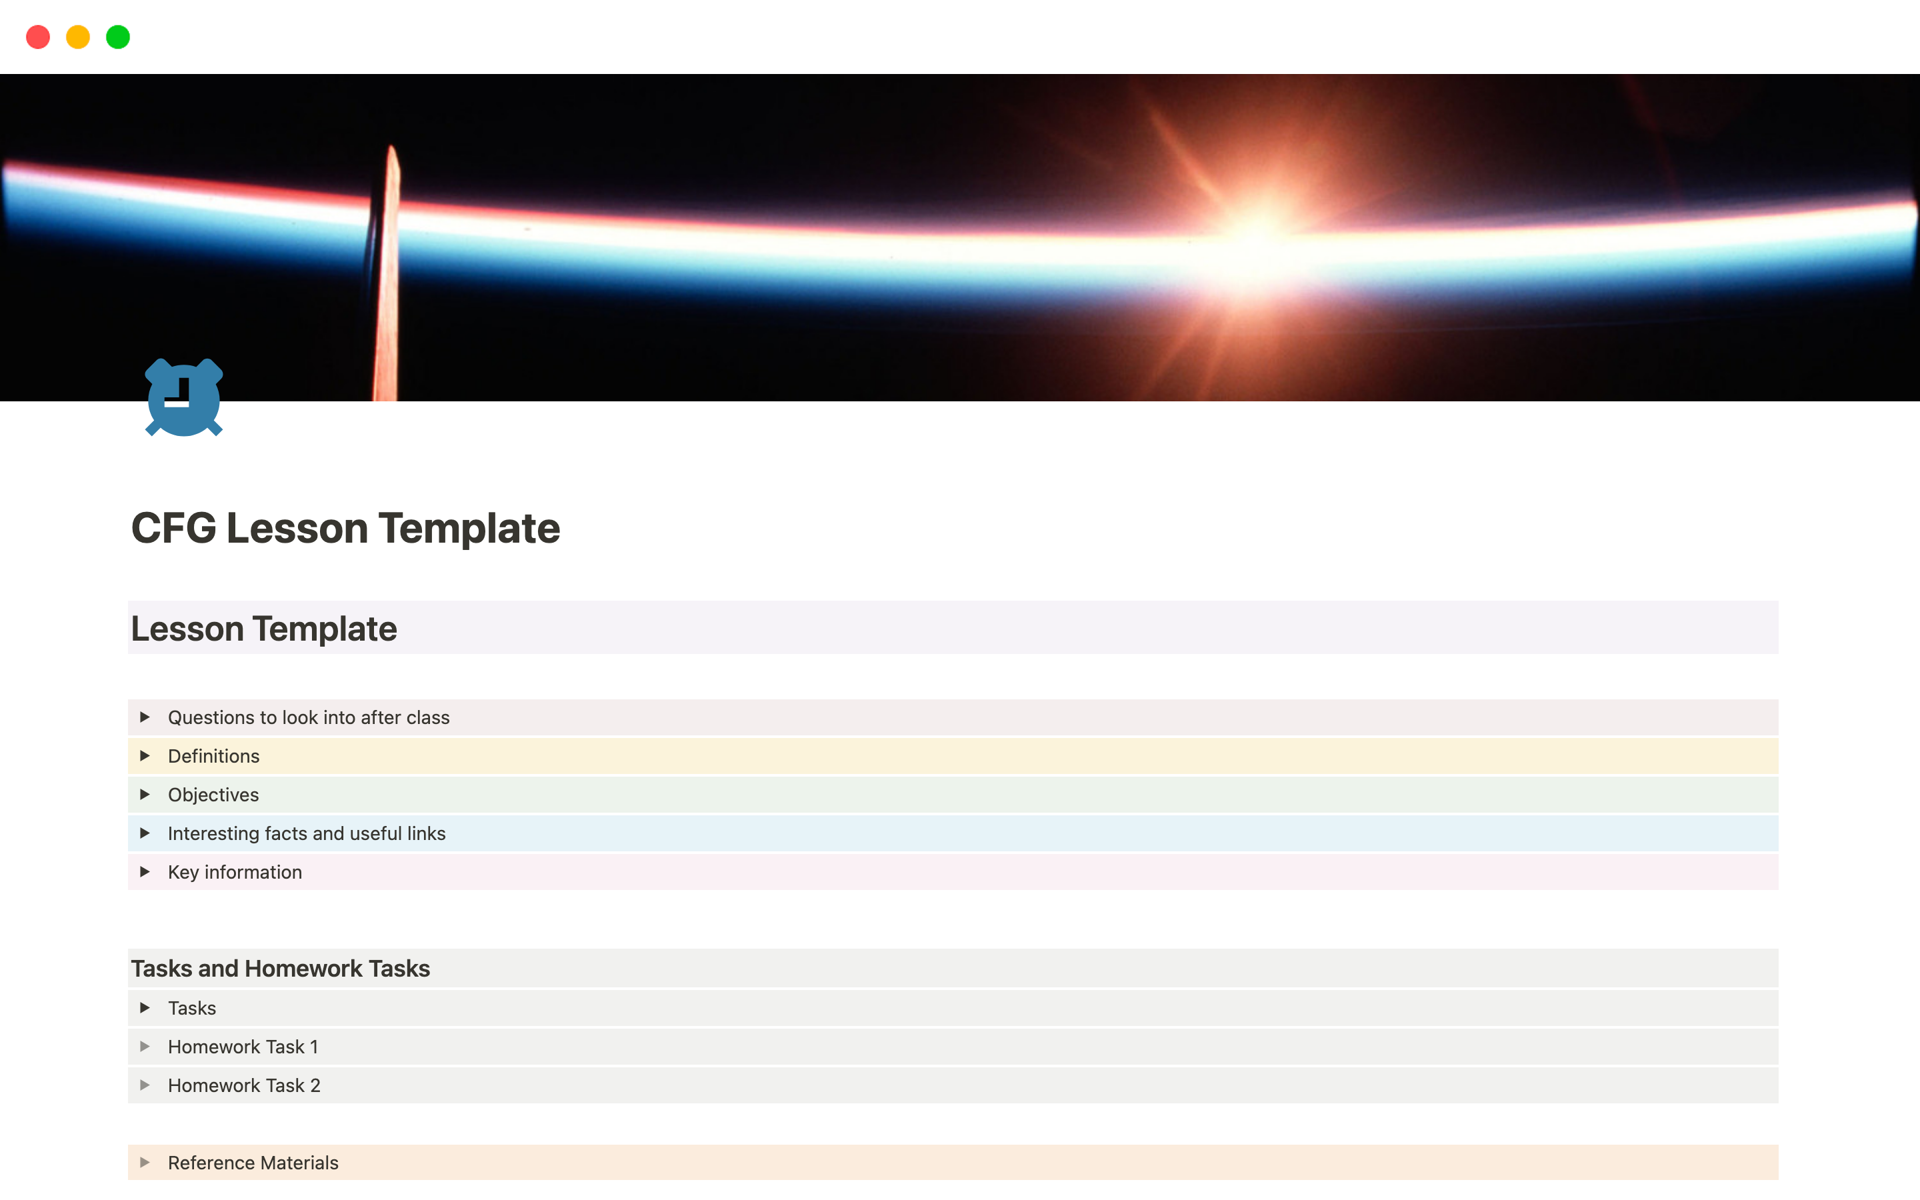 A template preview for CFG Lesson Template